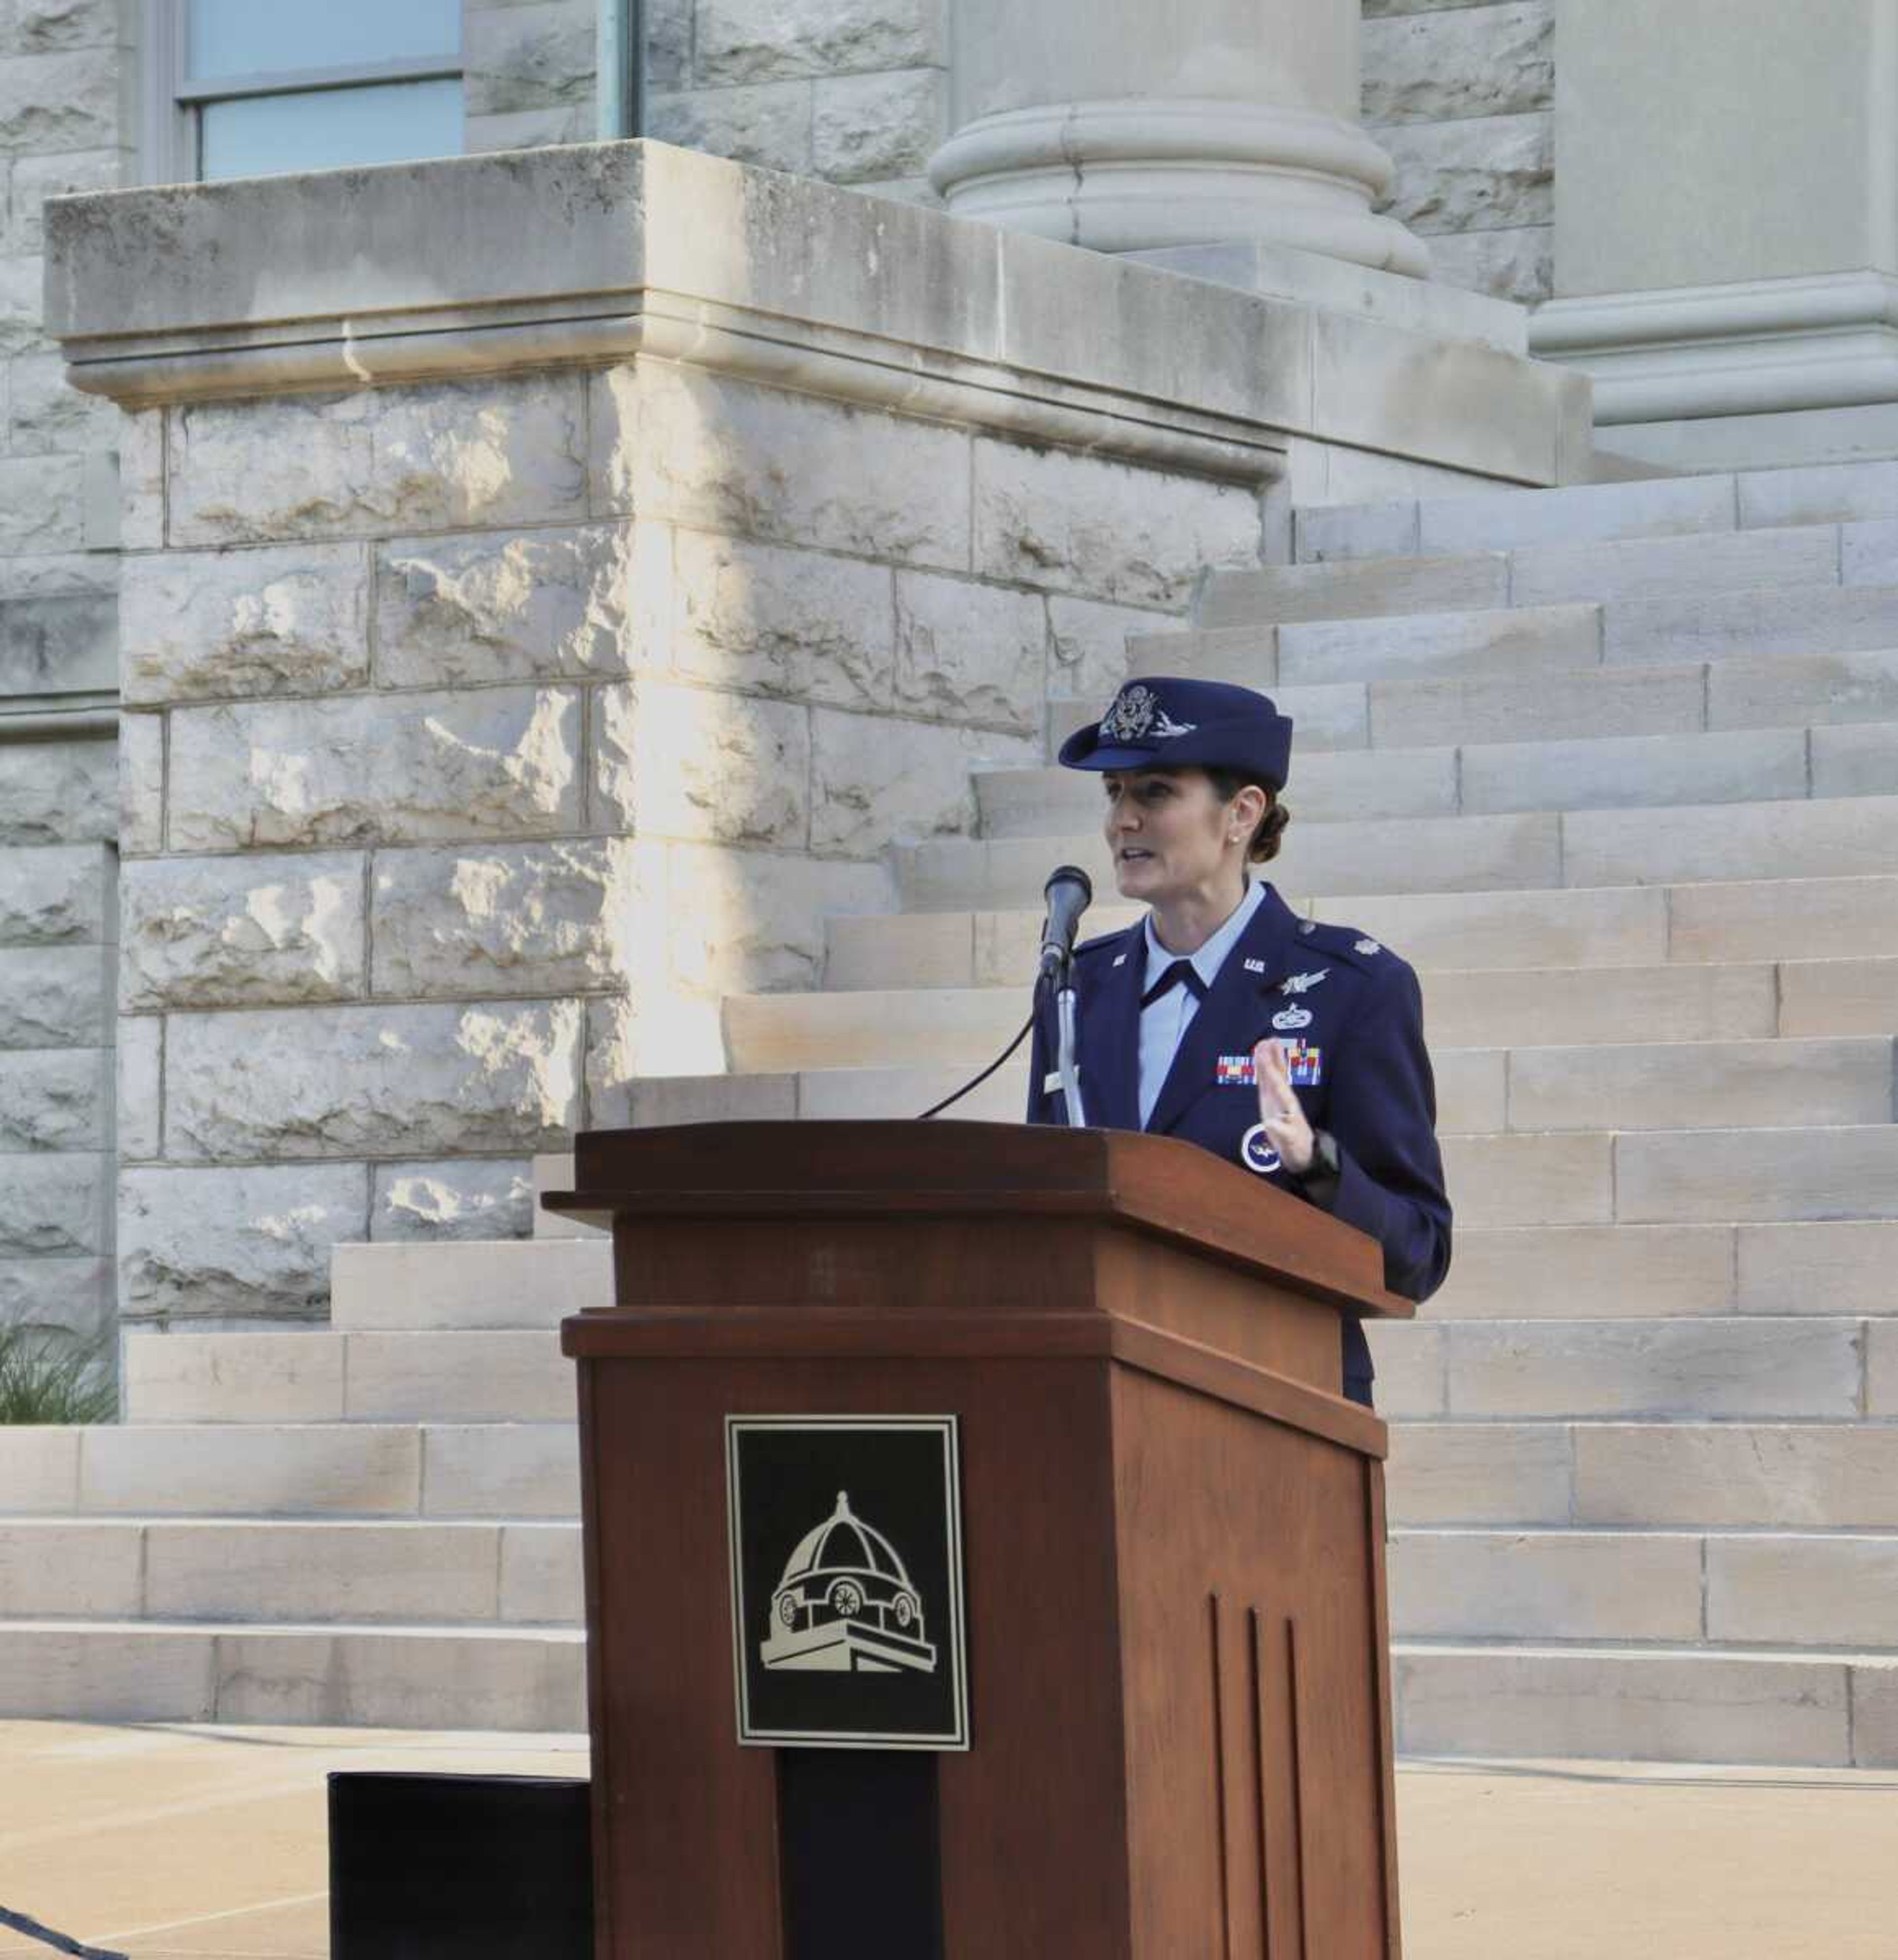 ROTC Air Force Det 205 Commander Lieutenant Colonel Dwyer spoke in honor tragedy that happened twenty-two years ago. She shares her uncles perspective and expresses to never forget.